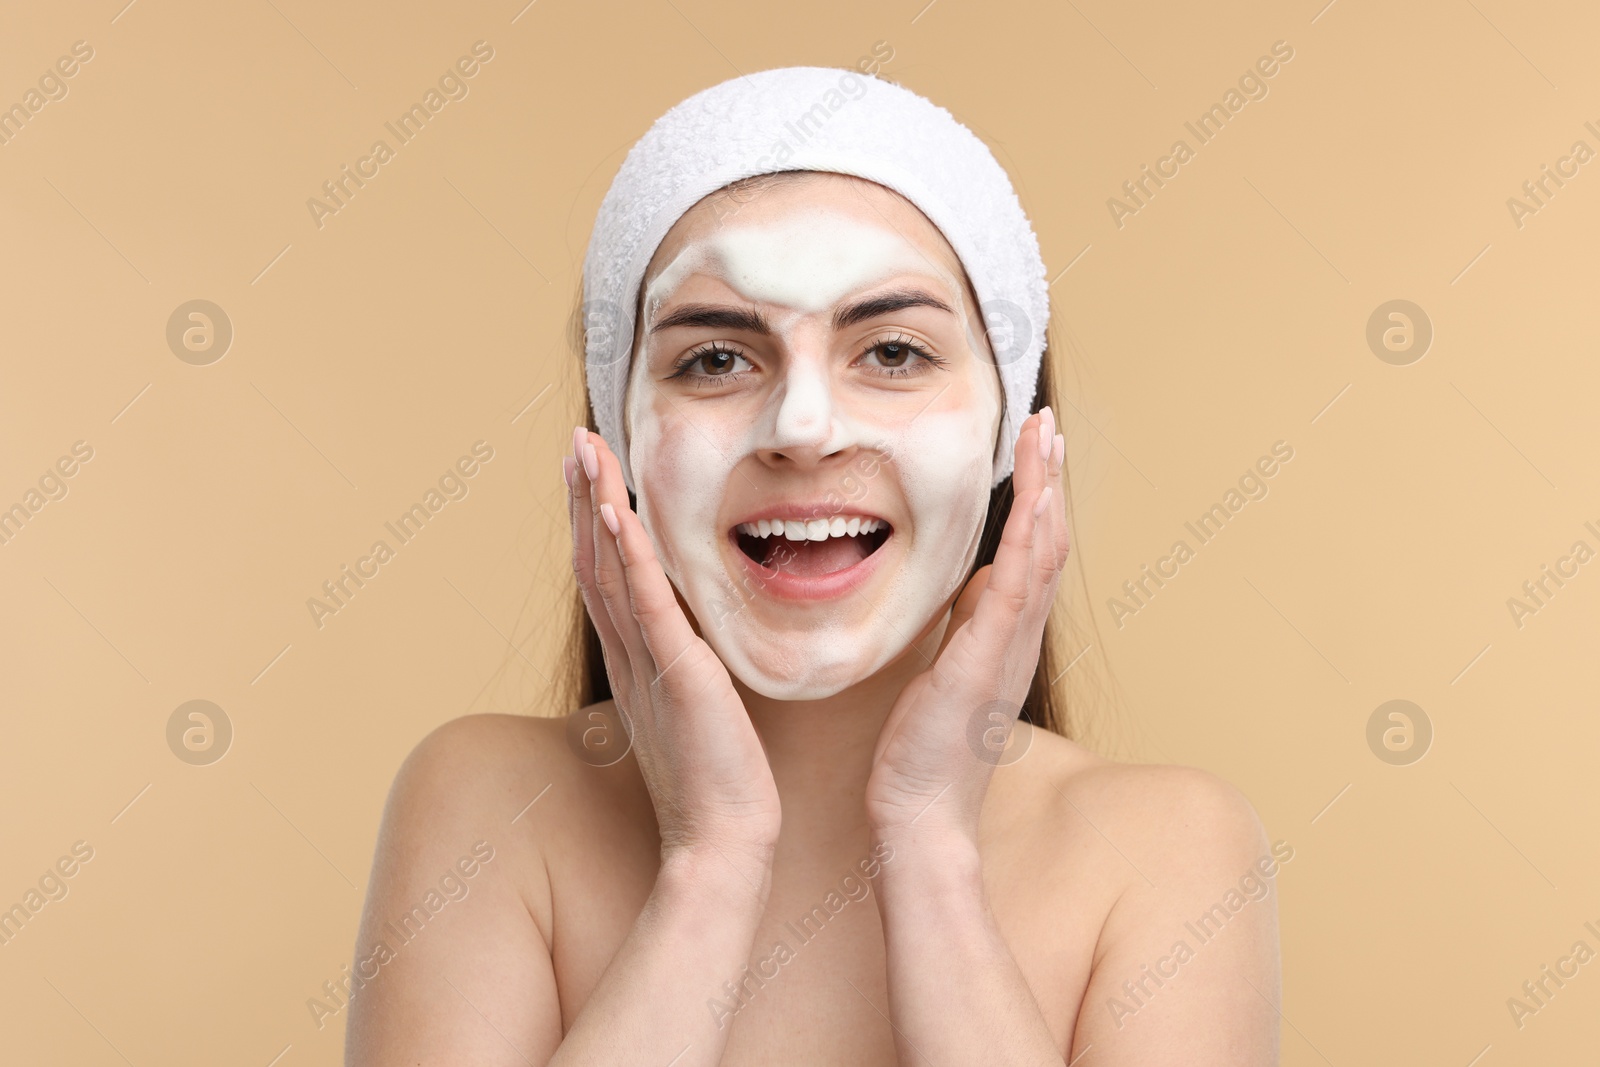 Photo of Young woman with headband washing her face on beige background